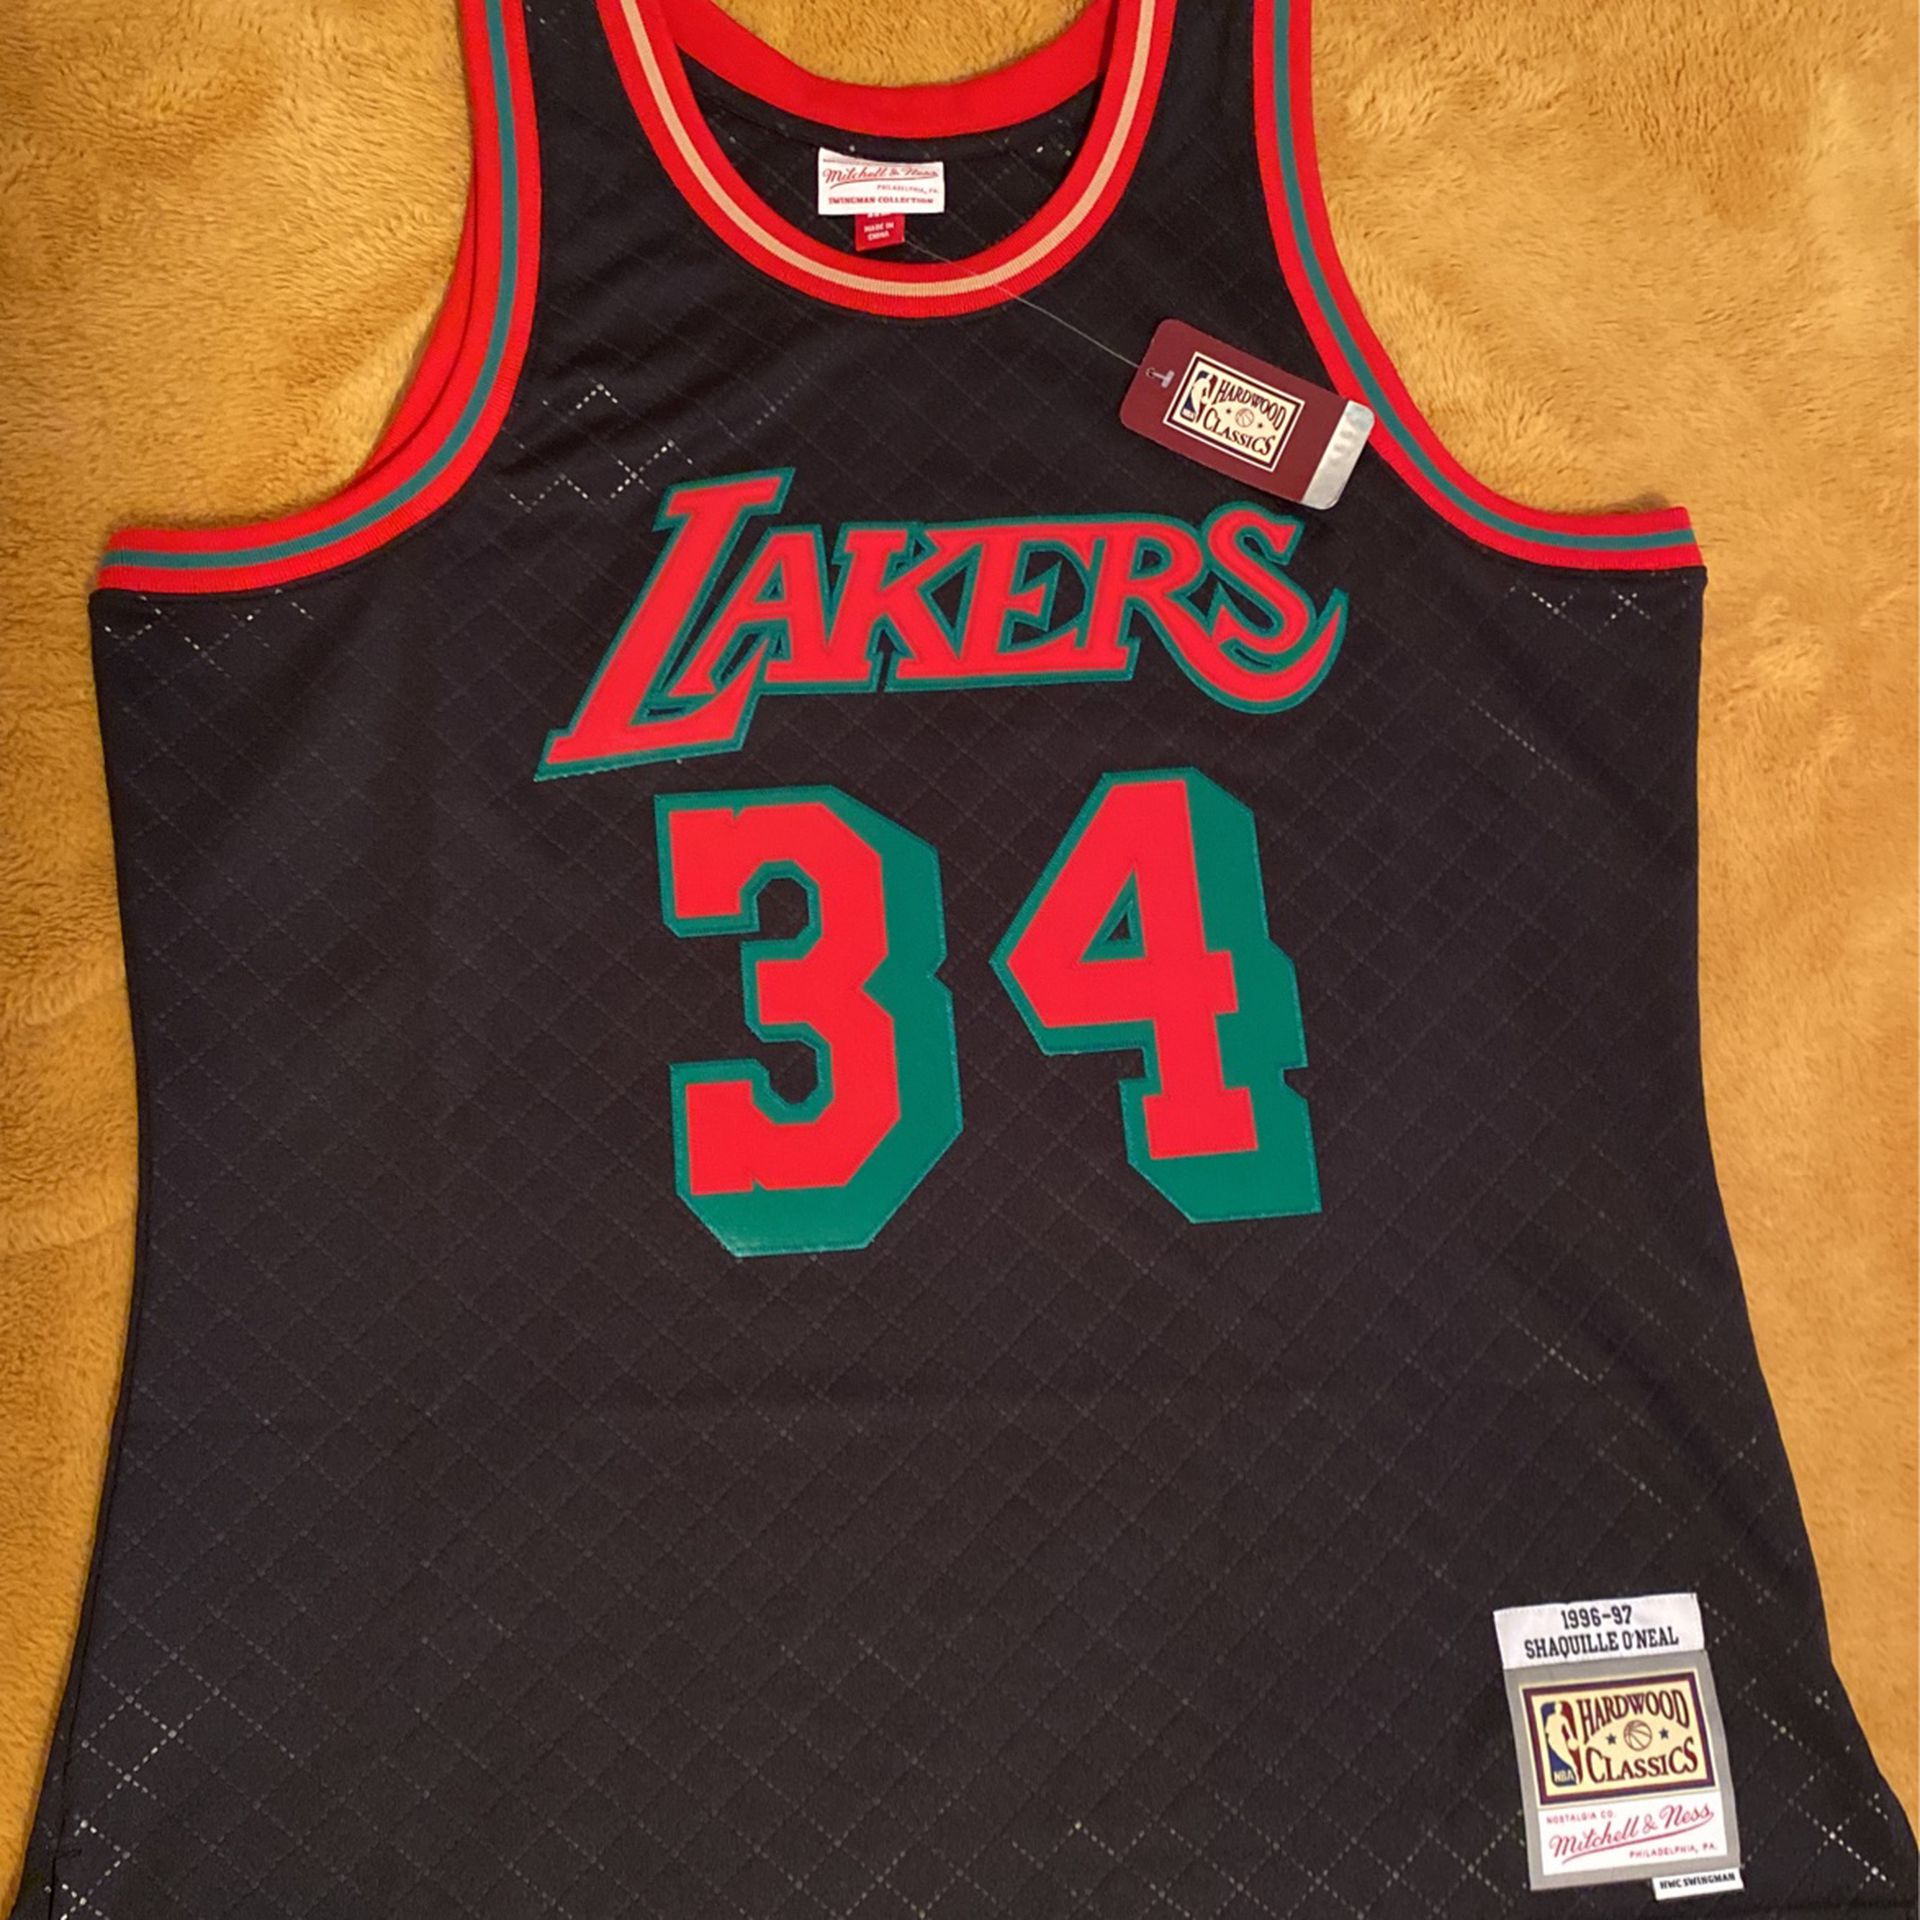 Hardwood classics Shaquille O’neal Lakers Jersey 